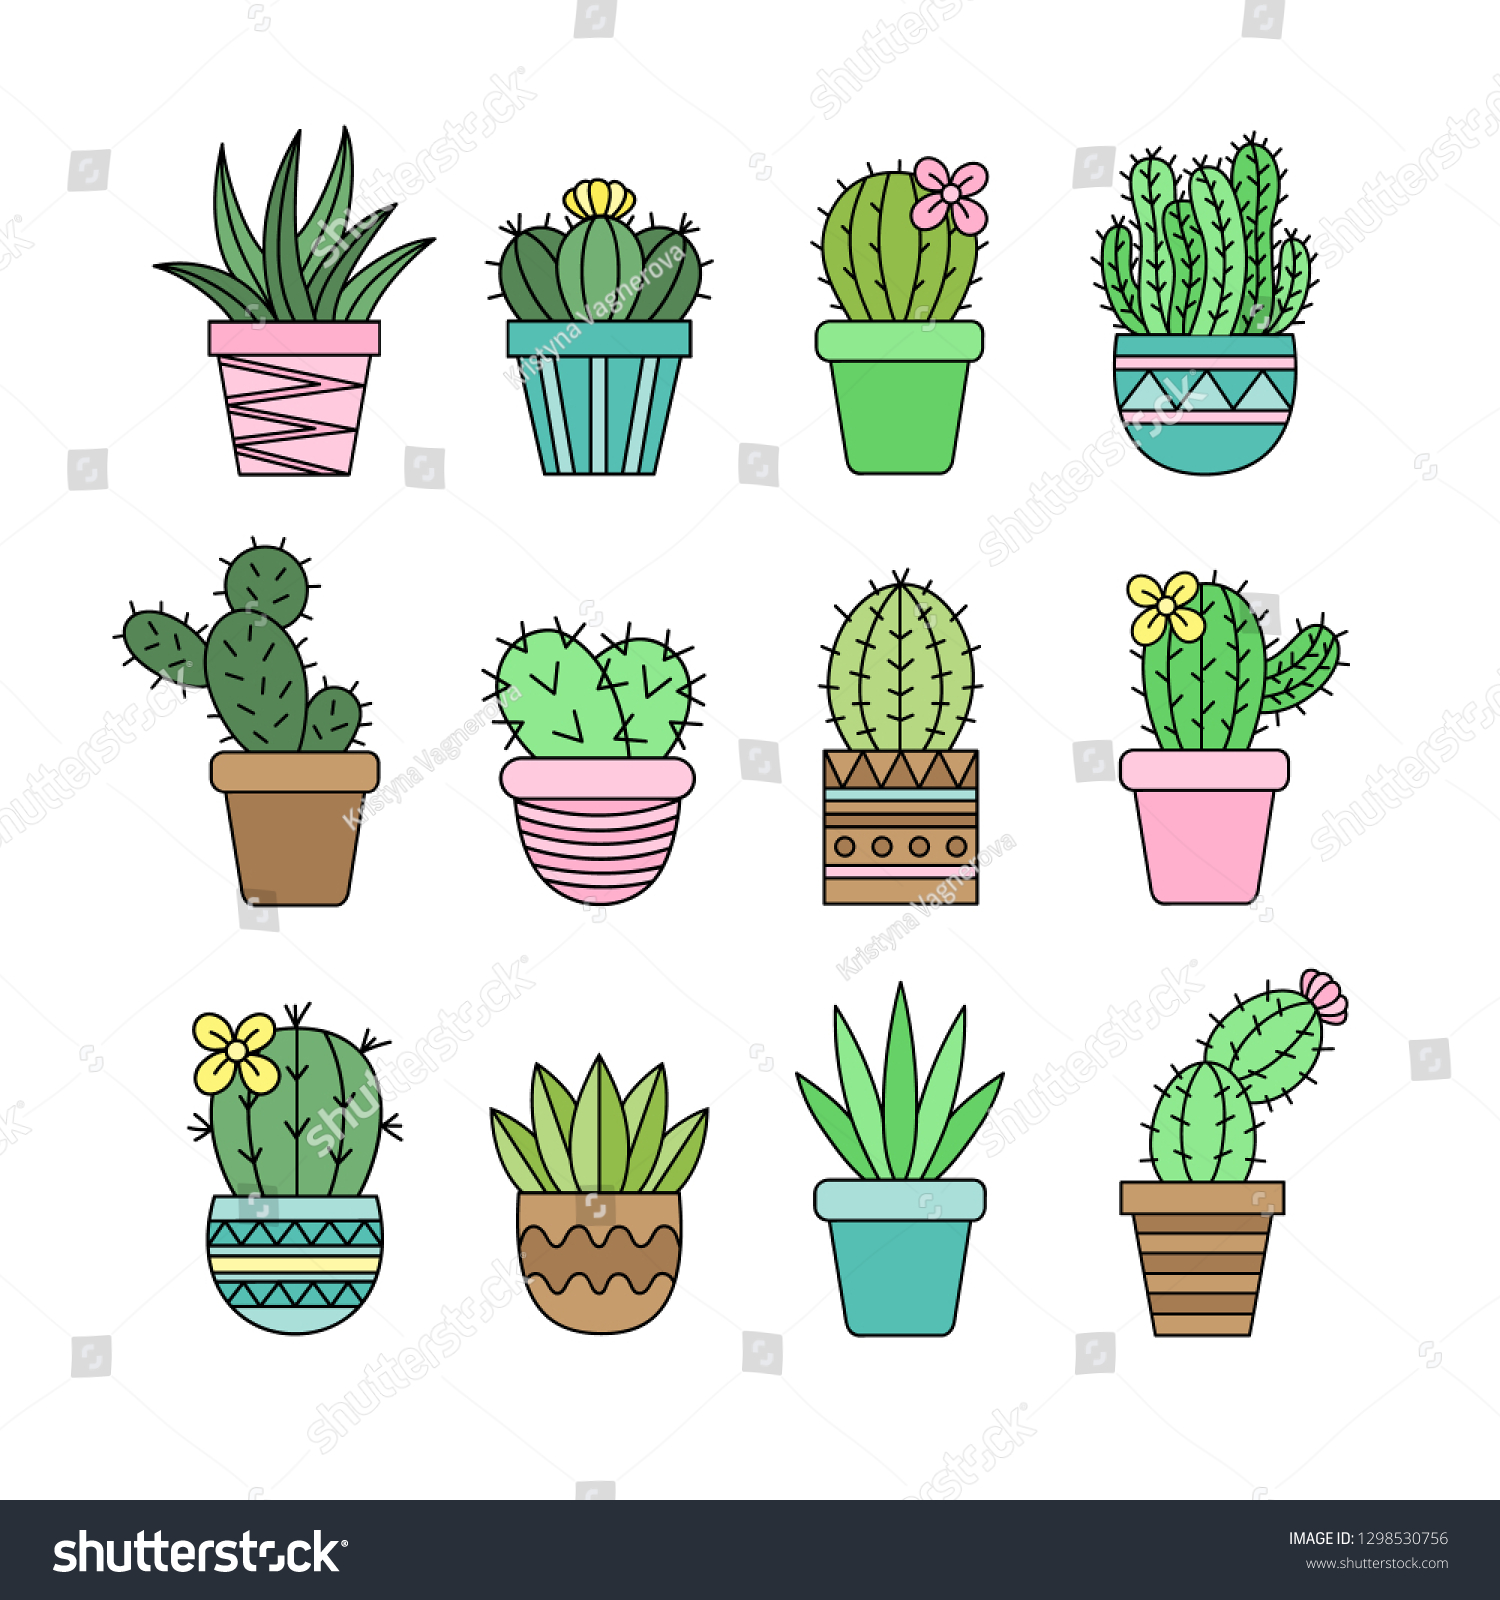 Cute Cactus Set Different Types Cacti Stock Vector Royalty Free 1298530756,Personal Space Bubble